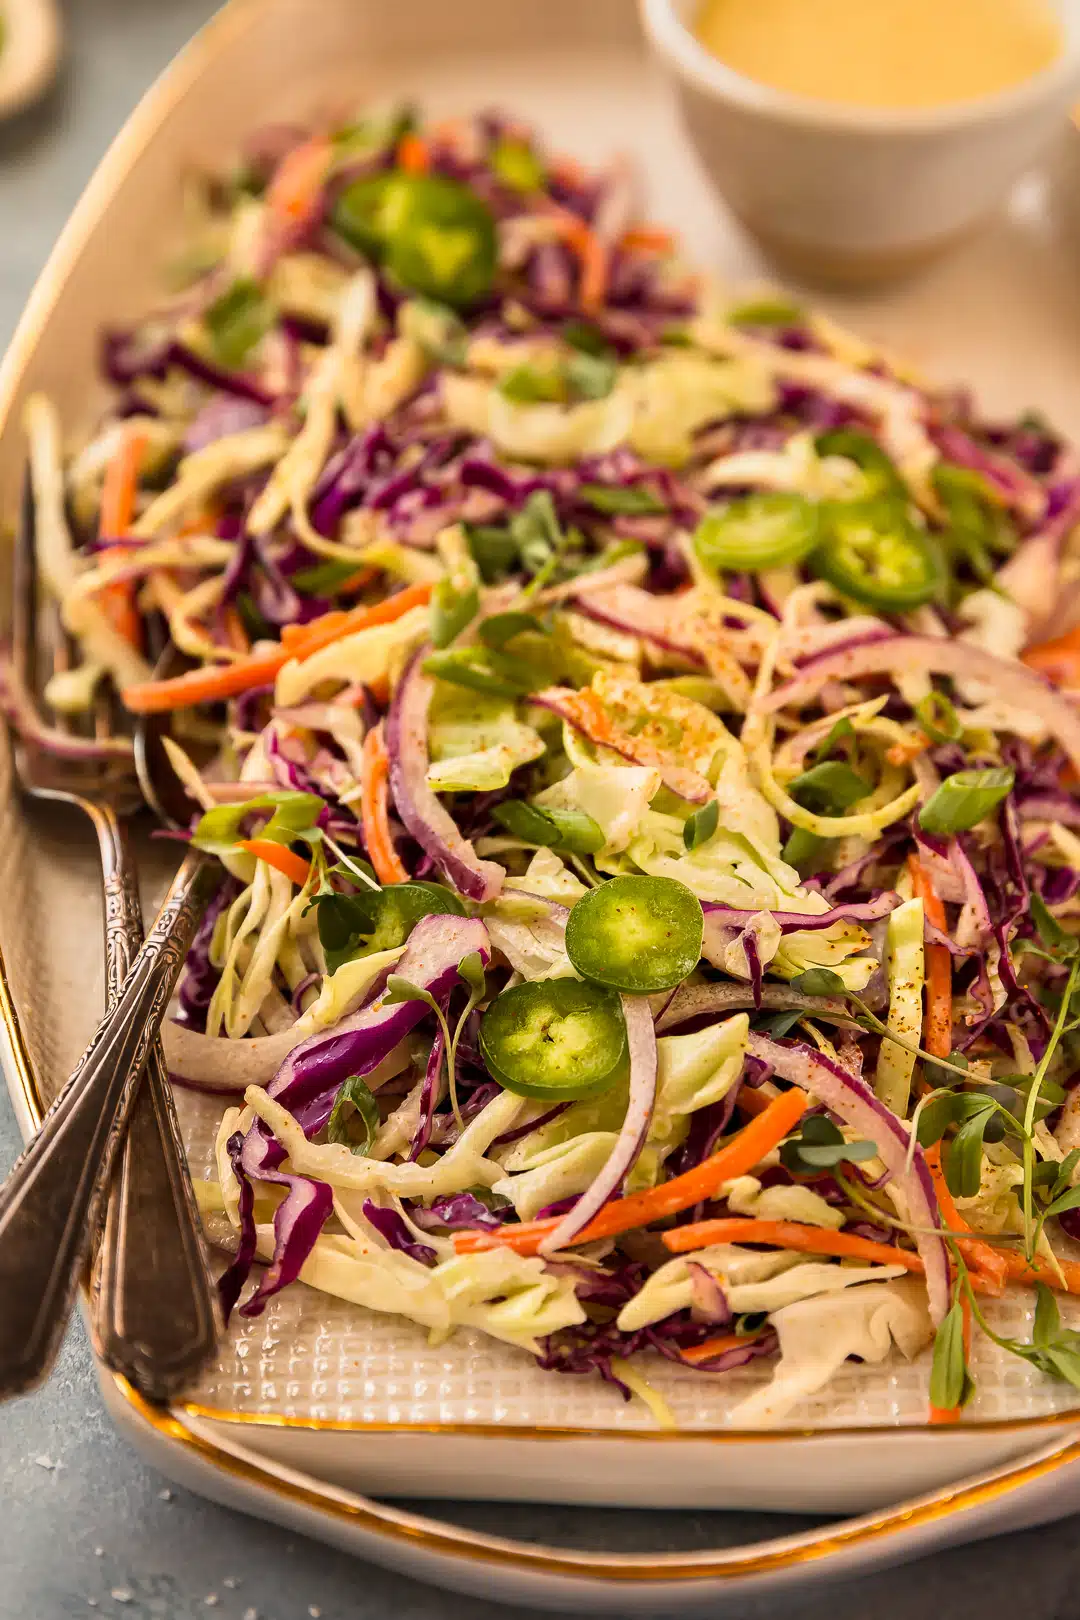 Angled photo illustrating the crunchy texture of jalapeno slaw with cilantro, cabbage, carrots, and red onions.